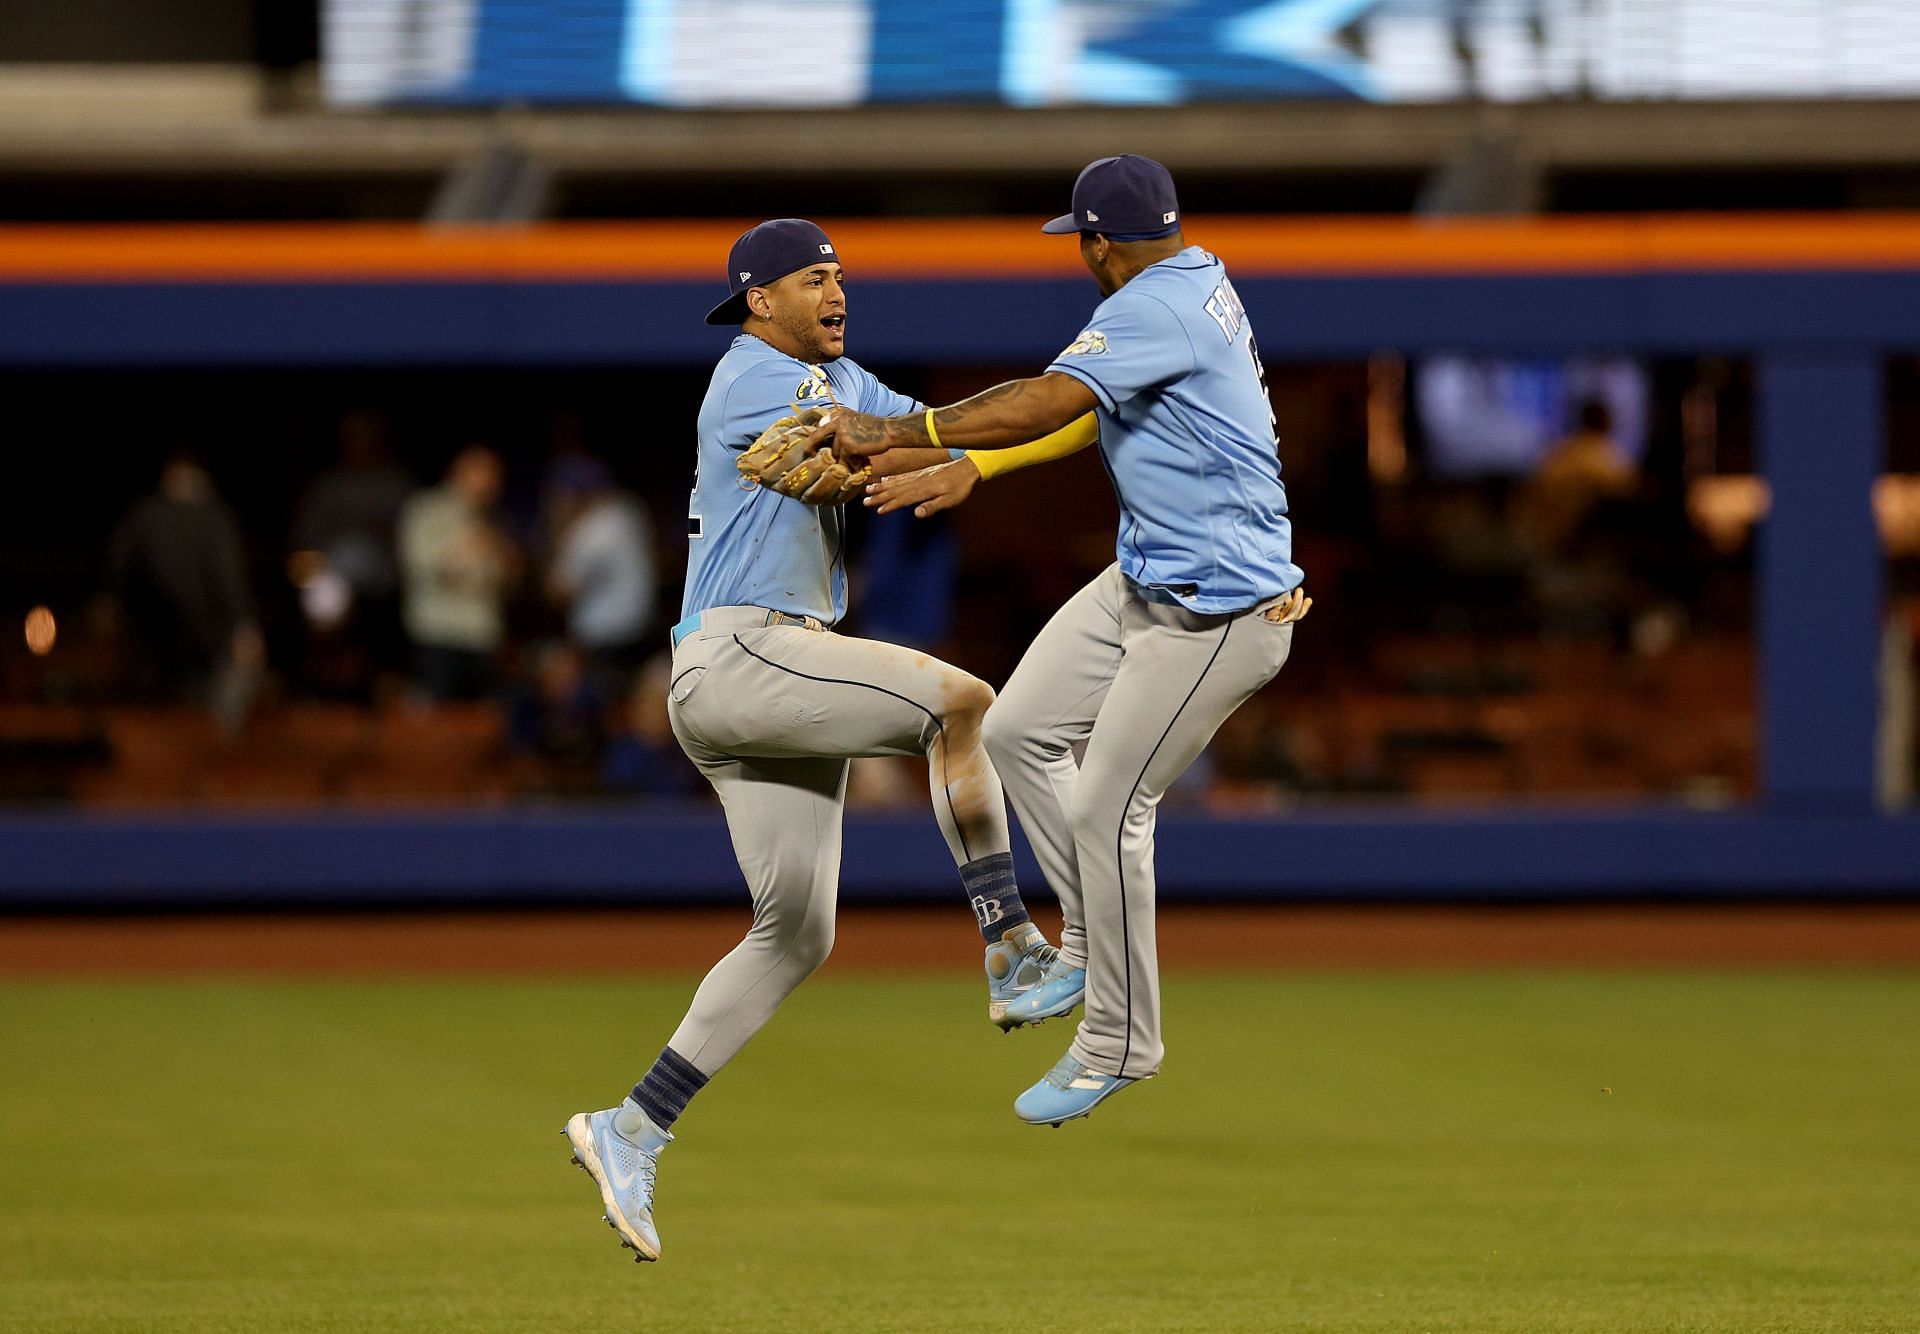 Adorable Stadium Video Captures Moment Tampa Bay Rays' Fan Throws Baseball  Back